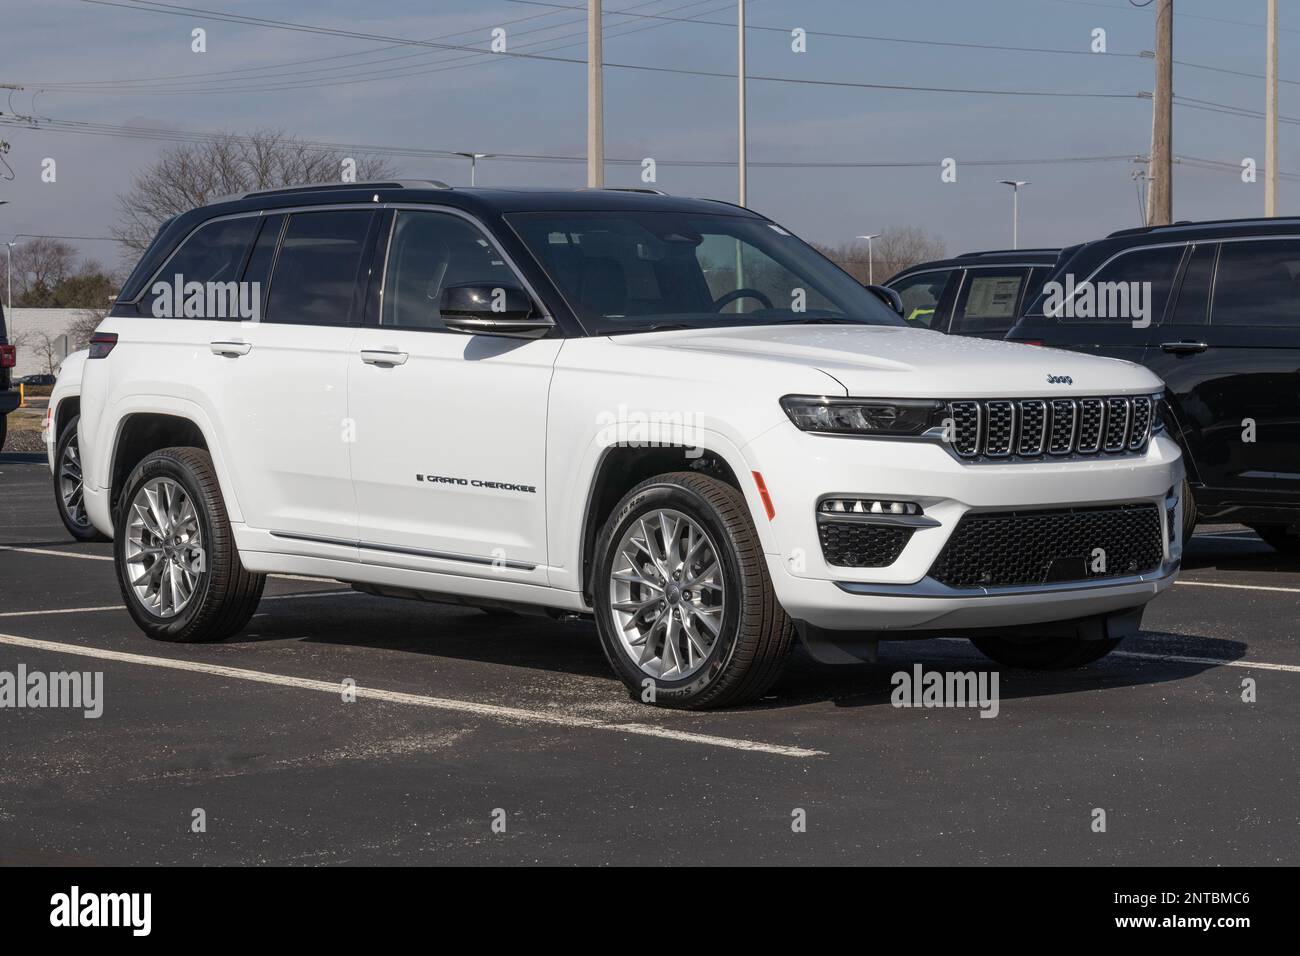 Noblesville - Circa February 2023: Jeep Grand Cherokee display at a dealership. Jeep offers the Grand Cherokee in Laredo, Limited, and Trailhawk model Stock Photo